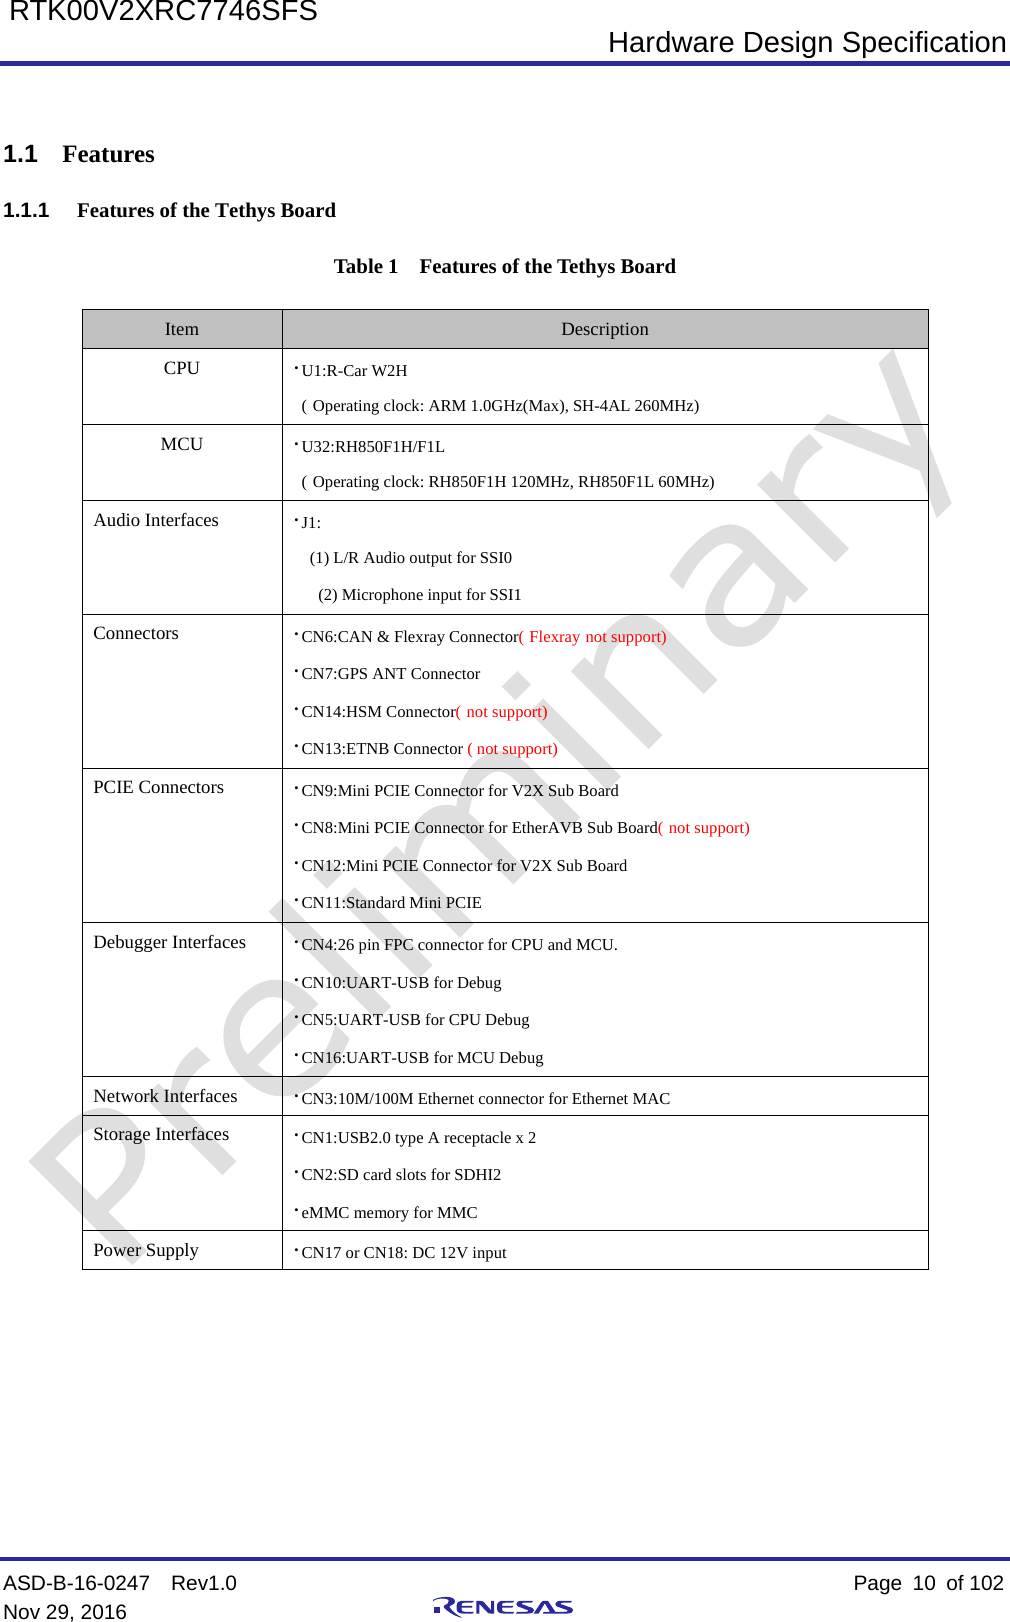  Hardware Design Specification ASD-B-16-0247  Rev1.0    Page  10 of 102 Nov 29, 2016     RTK00V2XRC7746SFS  1.1 Features 1.1.1 Features of the Tethys Board Table 1  Features of the Tethys Board Item  Description CPU ·U1:R-Car W2H   ( Operating clock: ARM 1.0GHz(Max), SH-4AL 260MHz) MCU ·U32:RH850F1H/F1L   ( Operating clock: RH850F1H 120MHz, RH850F1L 60MHz) Audio Interfaces ·J1: (1) L/R Audio output for SSI0 (2) Microphone input for SSI1 Connectors  ·CN6:CAN &amp; Flexray Connector( Flexray not support) ·CN7:GPS ANT Connector ·CN14:HSM Connector( not support) ·CN13:ETNB Connector ( not support) PCIE Connectors ·CN9:Mini PCIE Connector for V2X Sub Board ·CN8:Mini PCIE Connector for EtherAVB Sub Board( not support) ·CN12:Mini PCIE Connector for V2X Sub Board ·CN11:Standard Mini PCIE Debugger Interfaces ·CN4:26 pin FPC connector for CPU and MCU. ·CN10:UART-USB for Debug ·CN5:UART-USB for CPU Debug ·CN16:UART-USB for MCU Debug Network Interfaces ·CN3:10M/100M Ethernet connector for Ethernet MAC Storage Interfaces  ·CN1:USB2.0 type A receptacle x 2 ·CN2:SD card slots for SDHI2 ·eMMC memory for MMC Power Supply ·CN17 or CN18: DC 12V input        